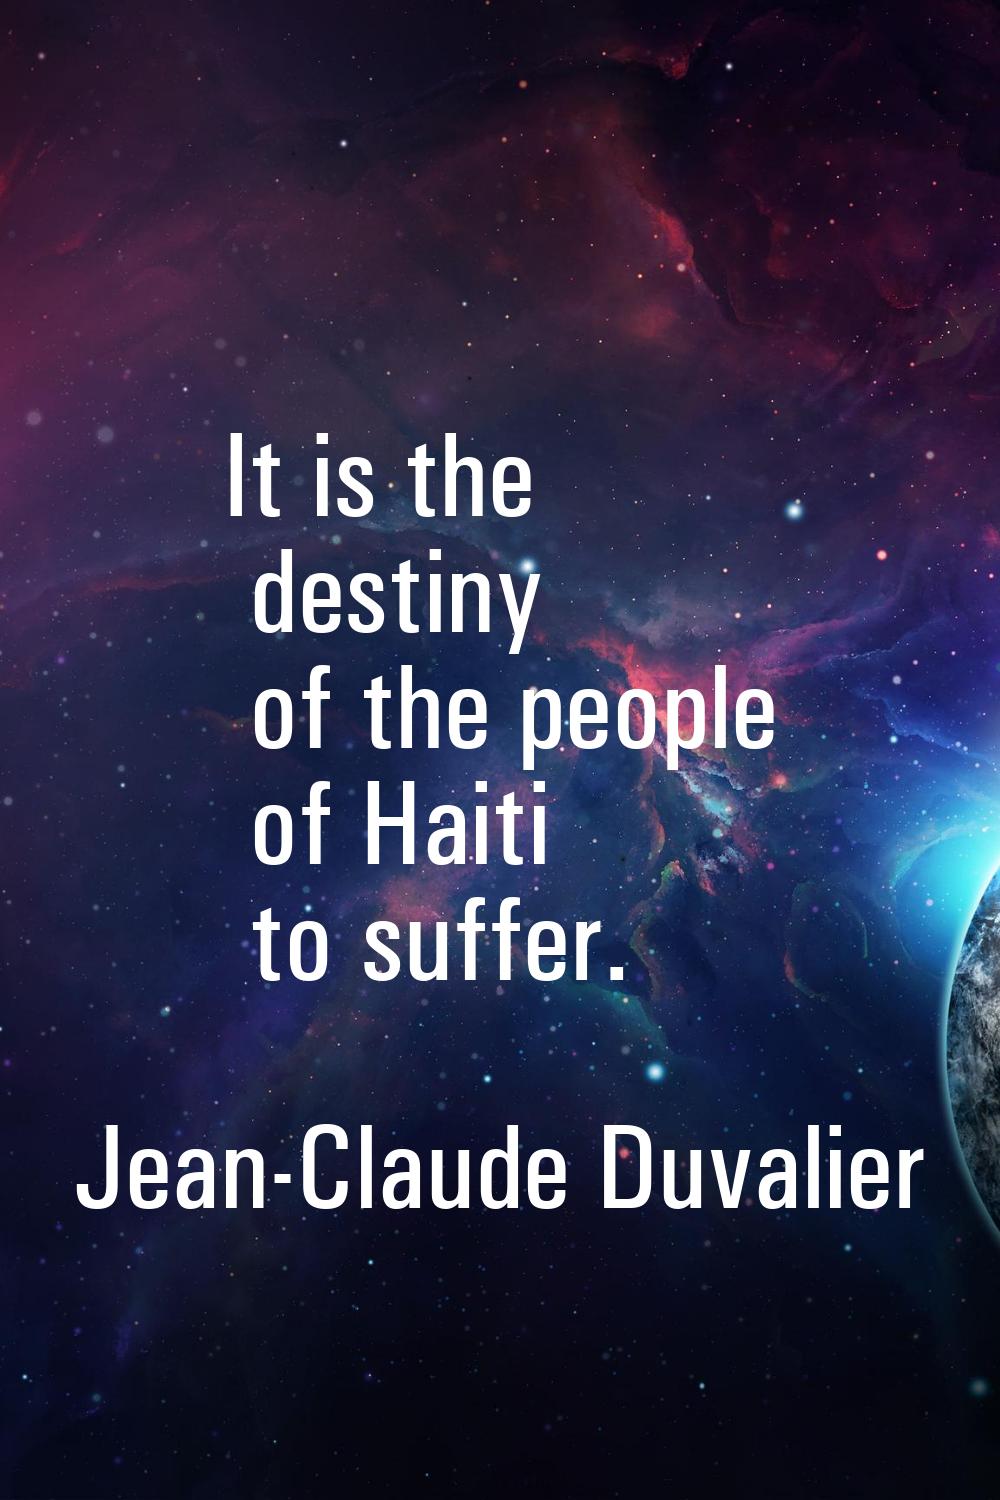 It is the destiny of the people of Haiti to suffer.